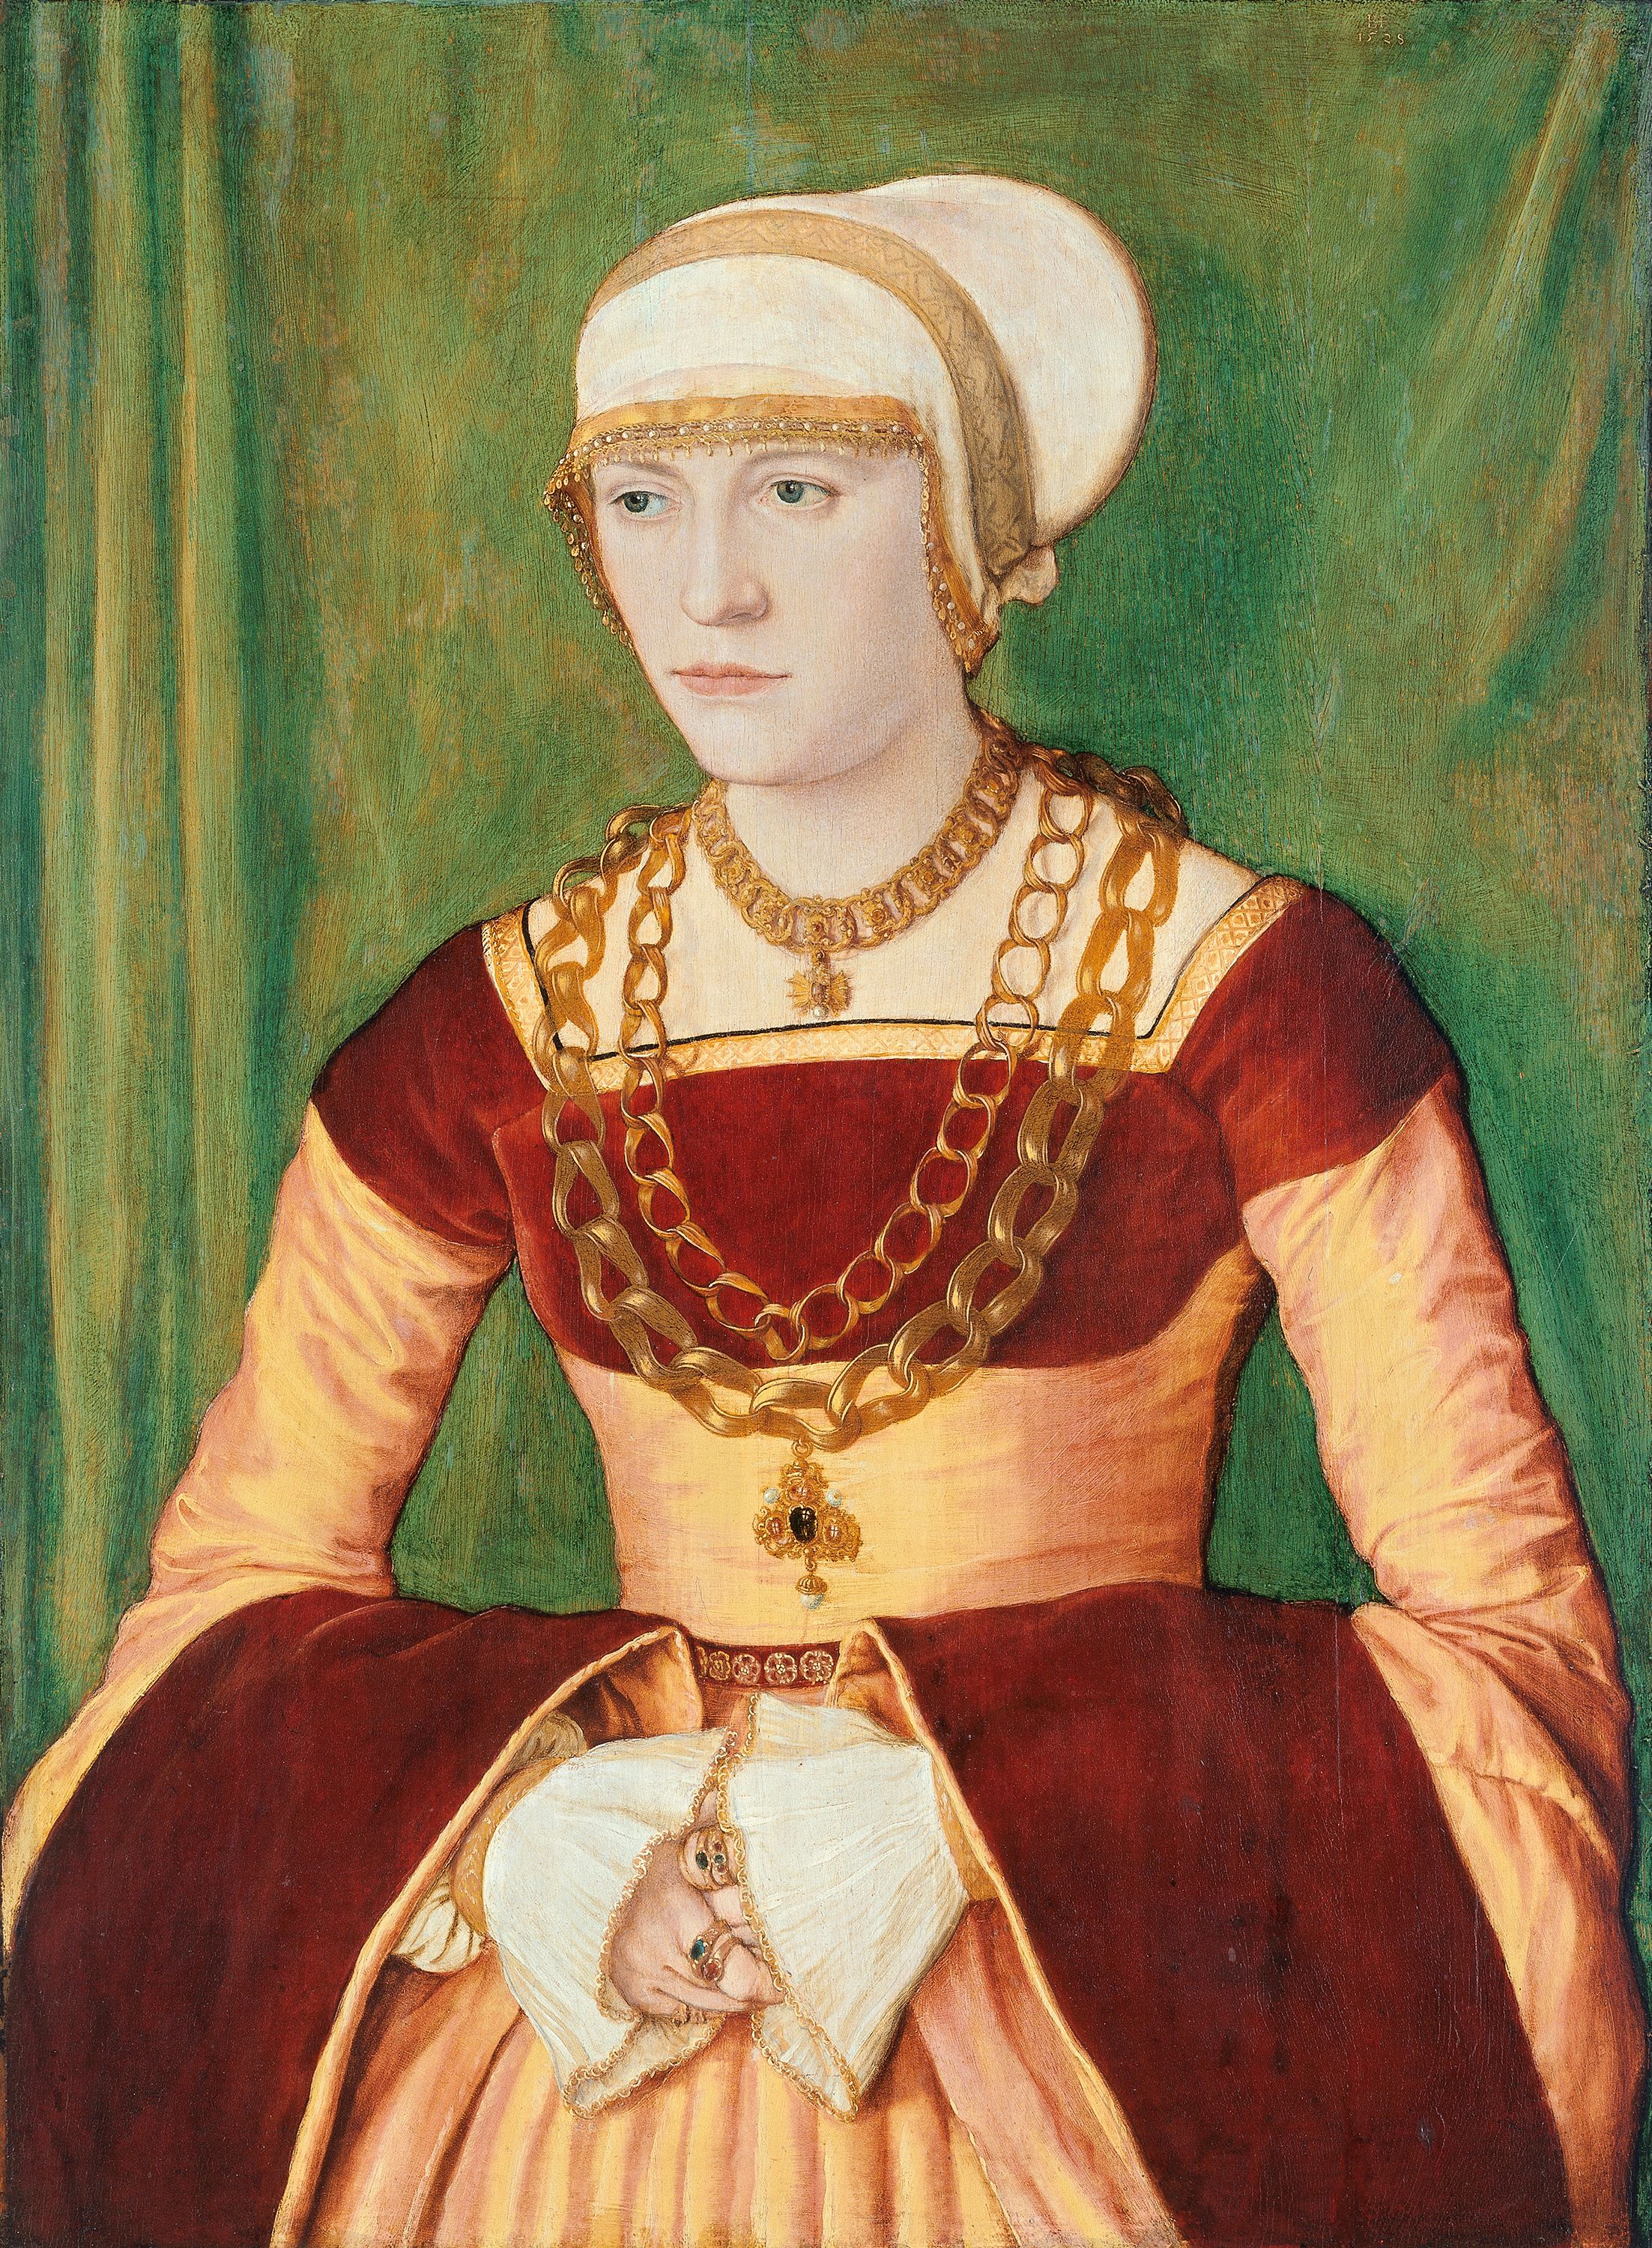 Portrait of Ursula Rudolph wearing multiple heavy chains by Barthel Beham, 1528. 